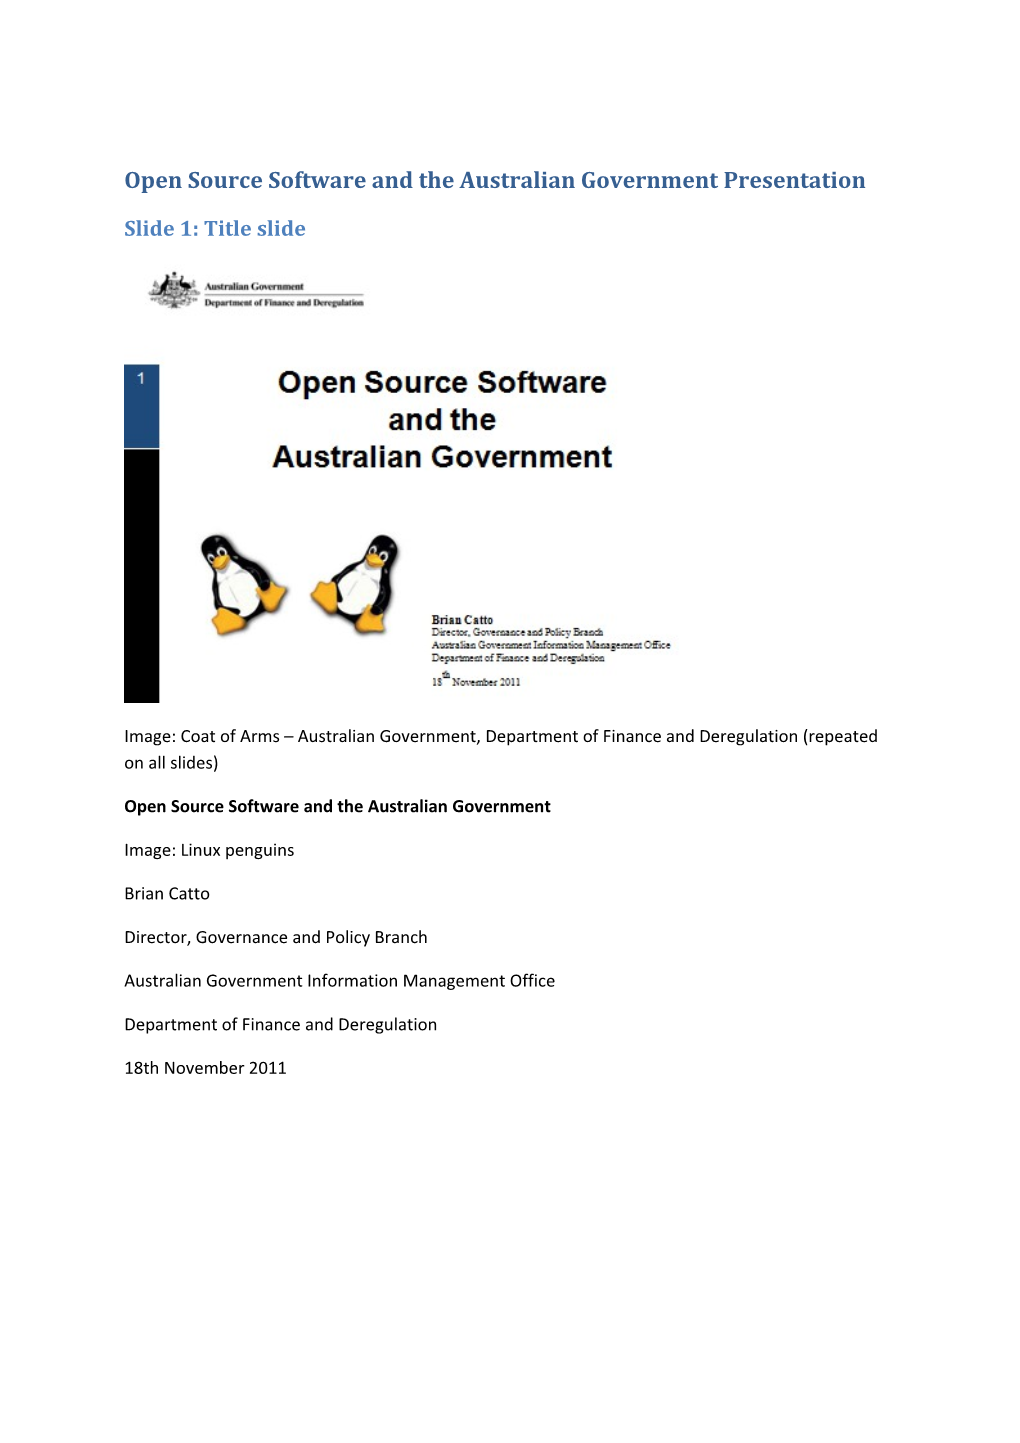 Open Source Software and the Australian Government November 2011